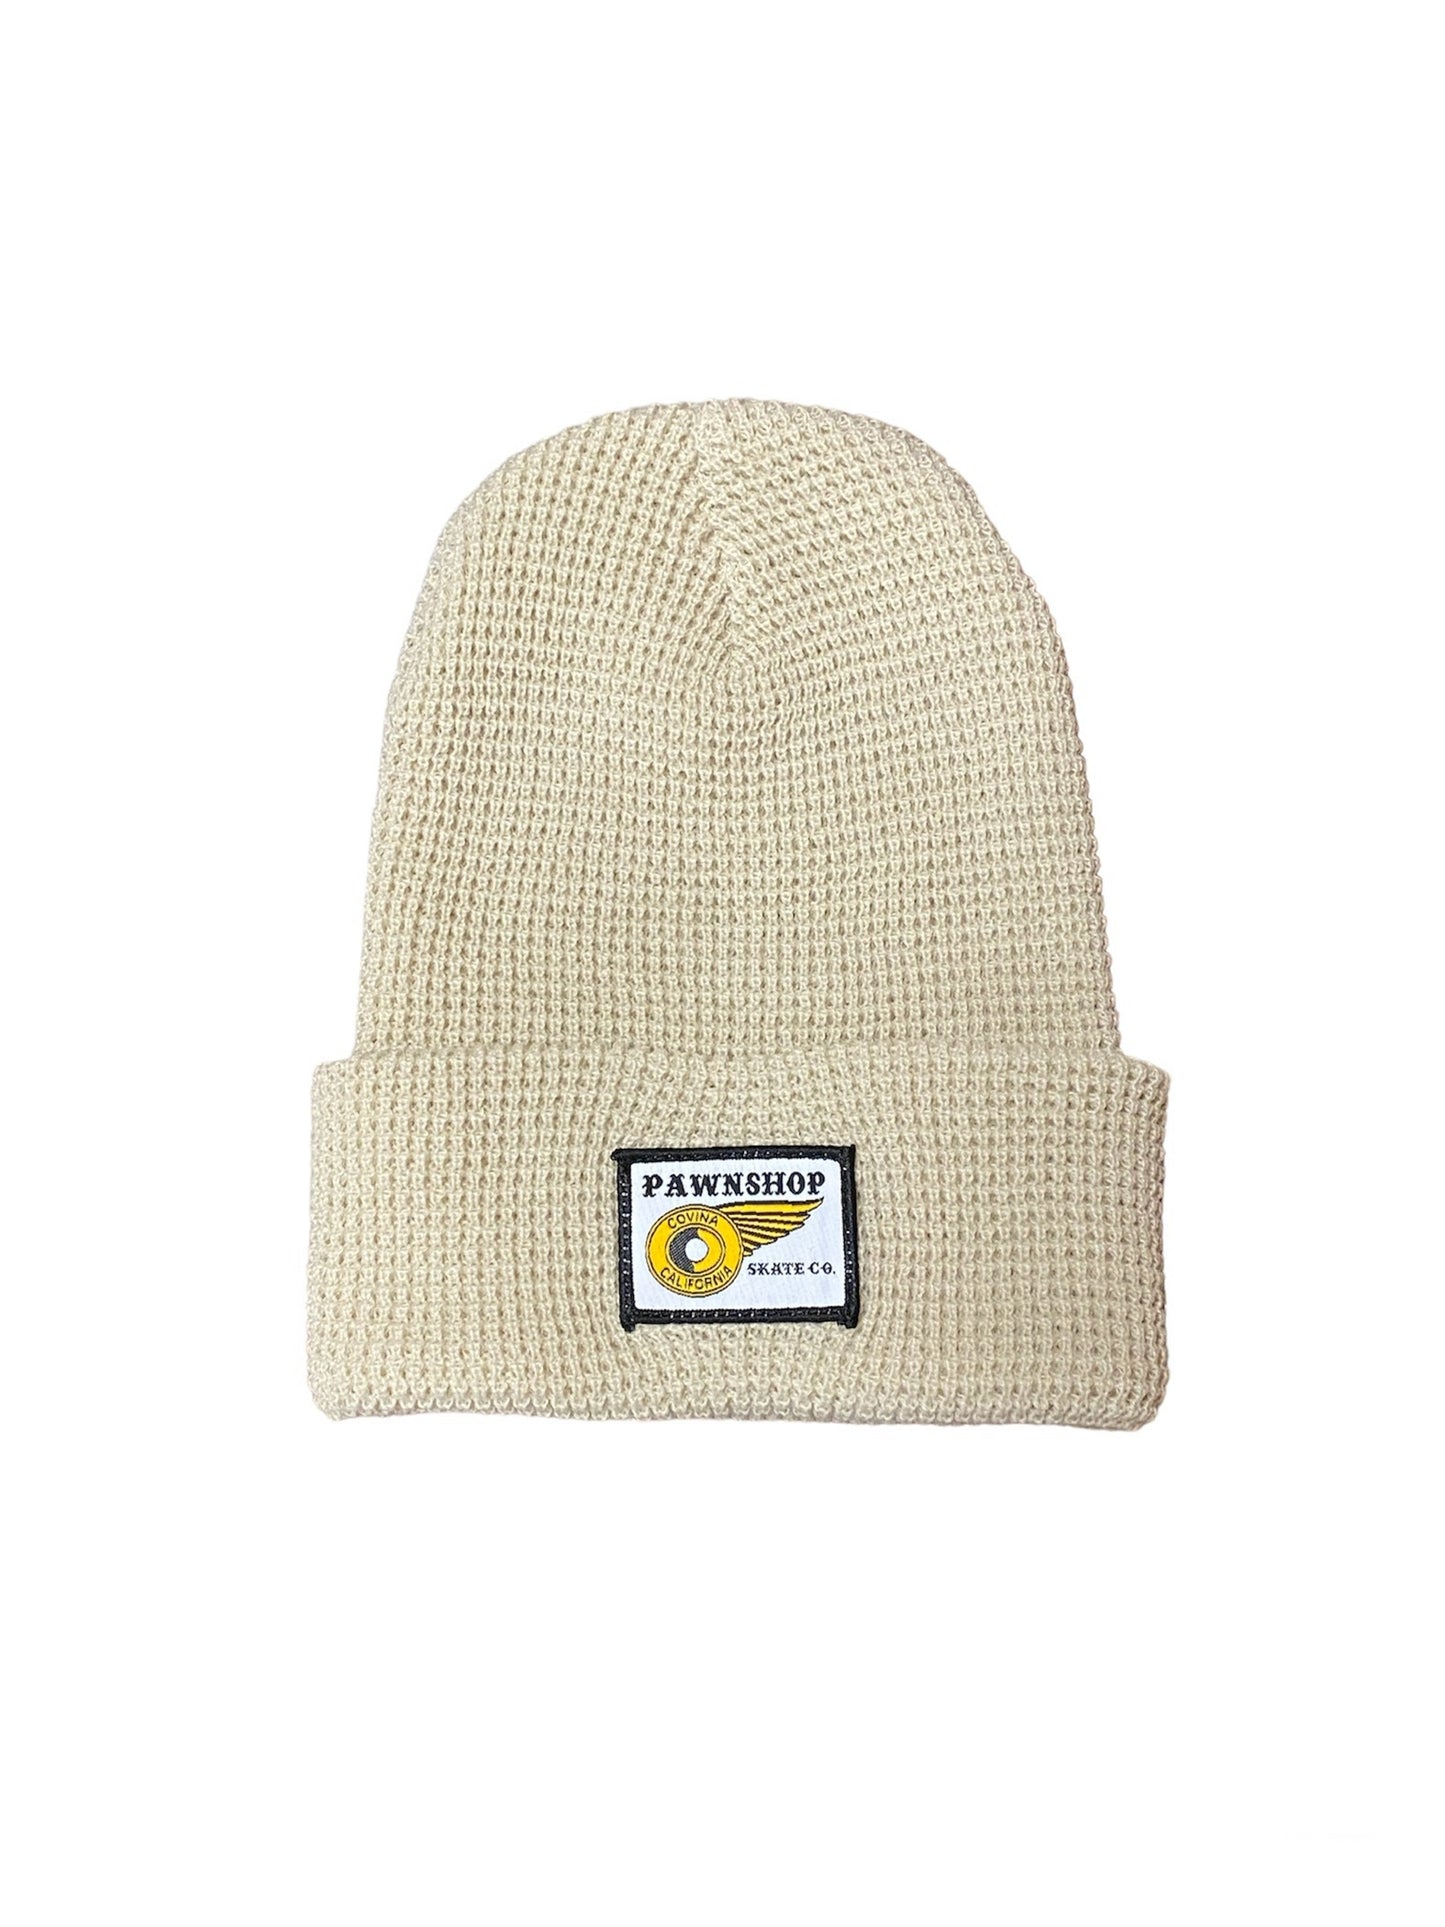 Pawnshop Wing and Wheel Knitted Cuff Beanie